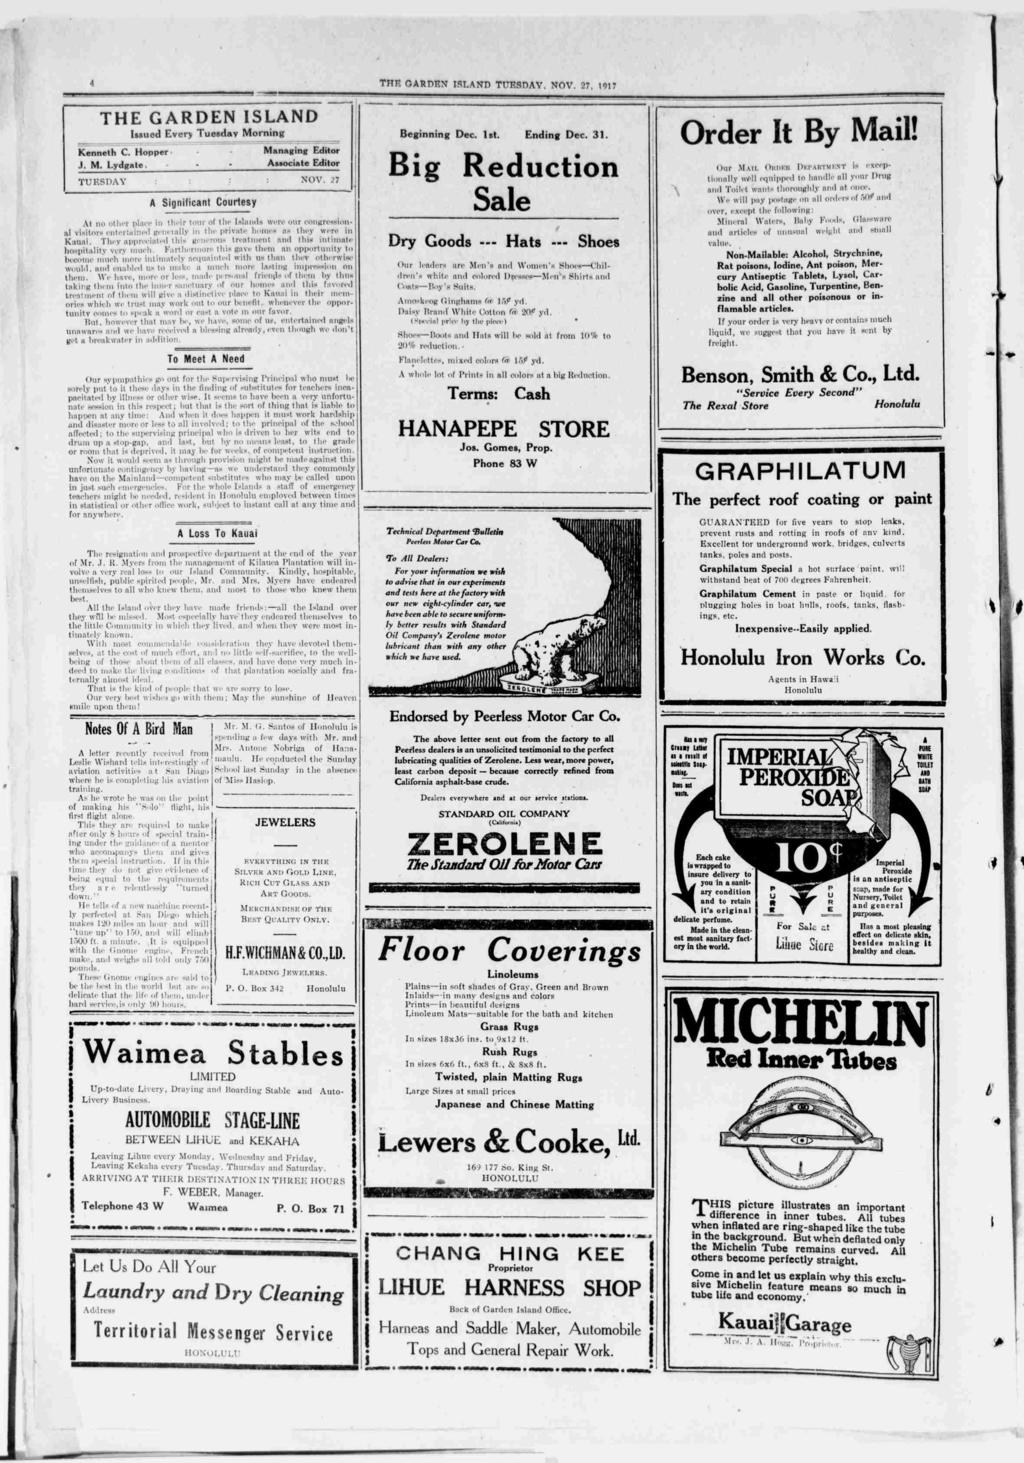 THE GARDEN SLAND TUESDAY, NOV 27, 1917 THE GARDEN SLAND ssued Every Tuesday Mornng Kenneth C Hopper J M Lydgate TUESDAY A Sgnfcant Courtesy Managng Assocate Edtor Edtor NOV 27 At no other plaee n